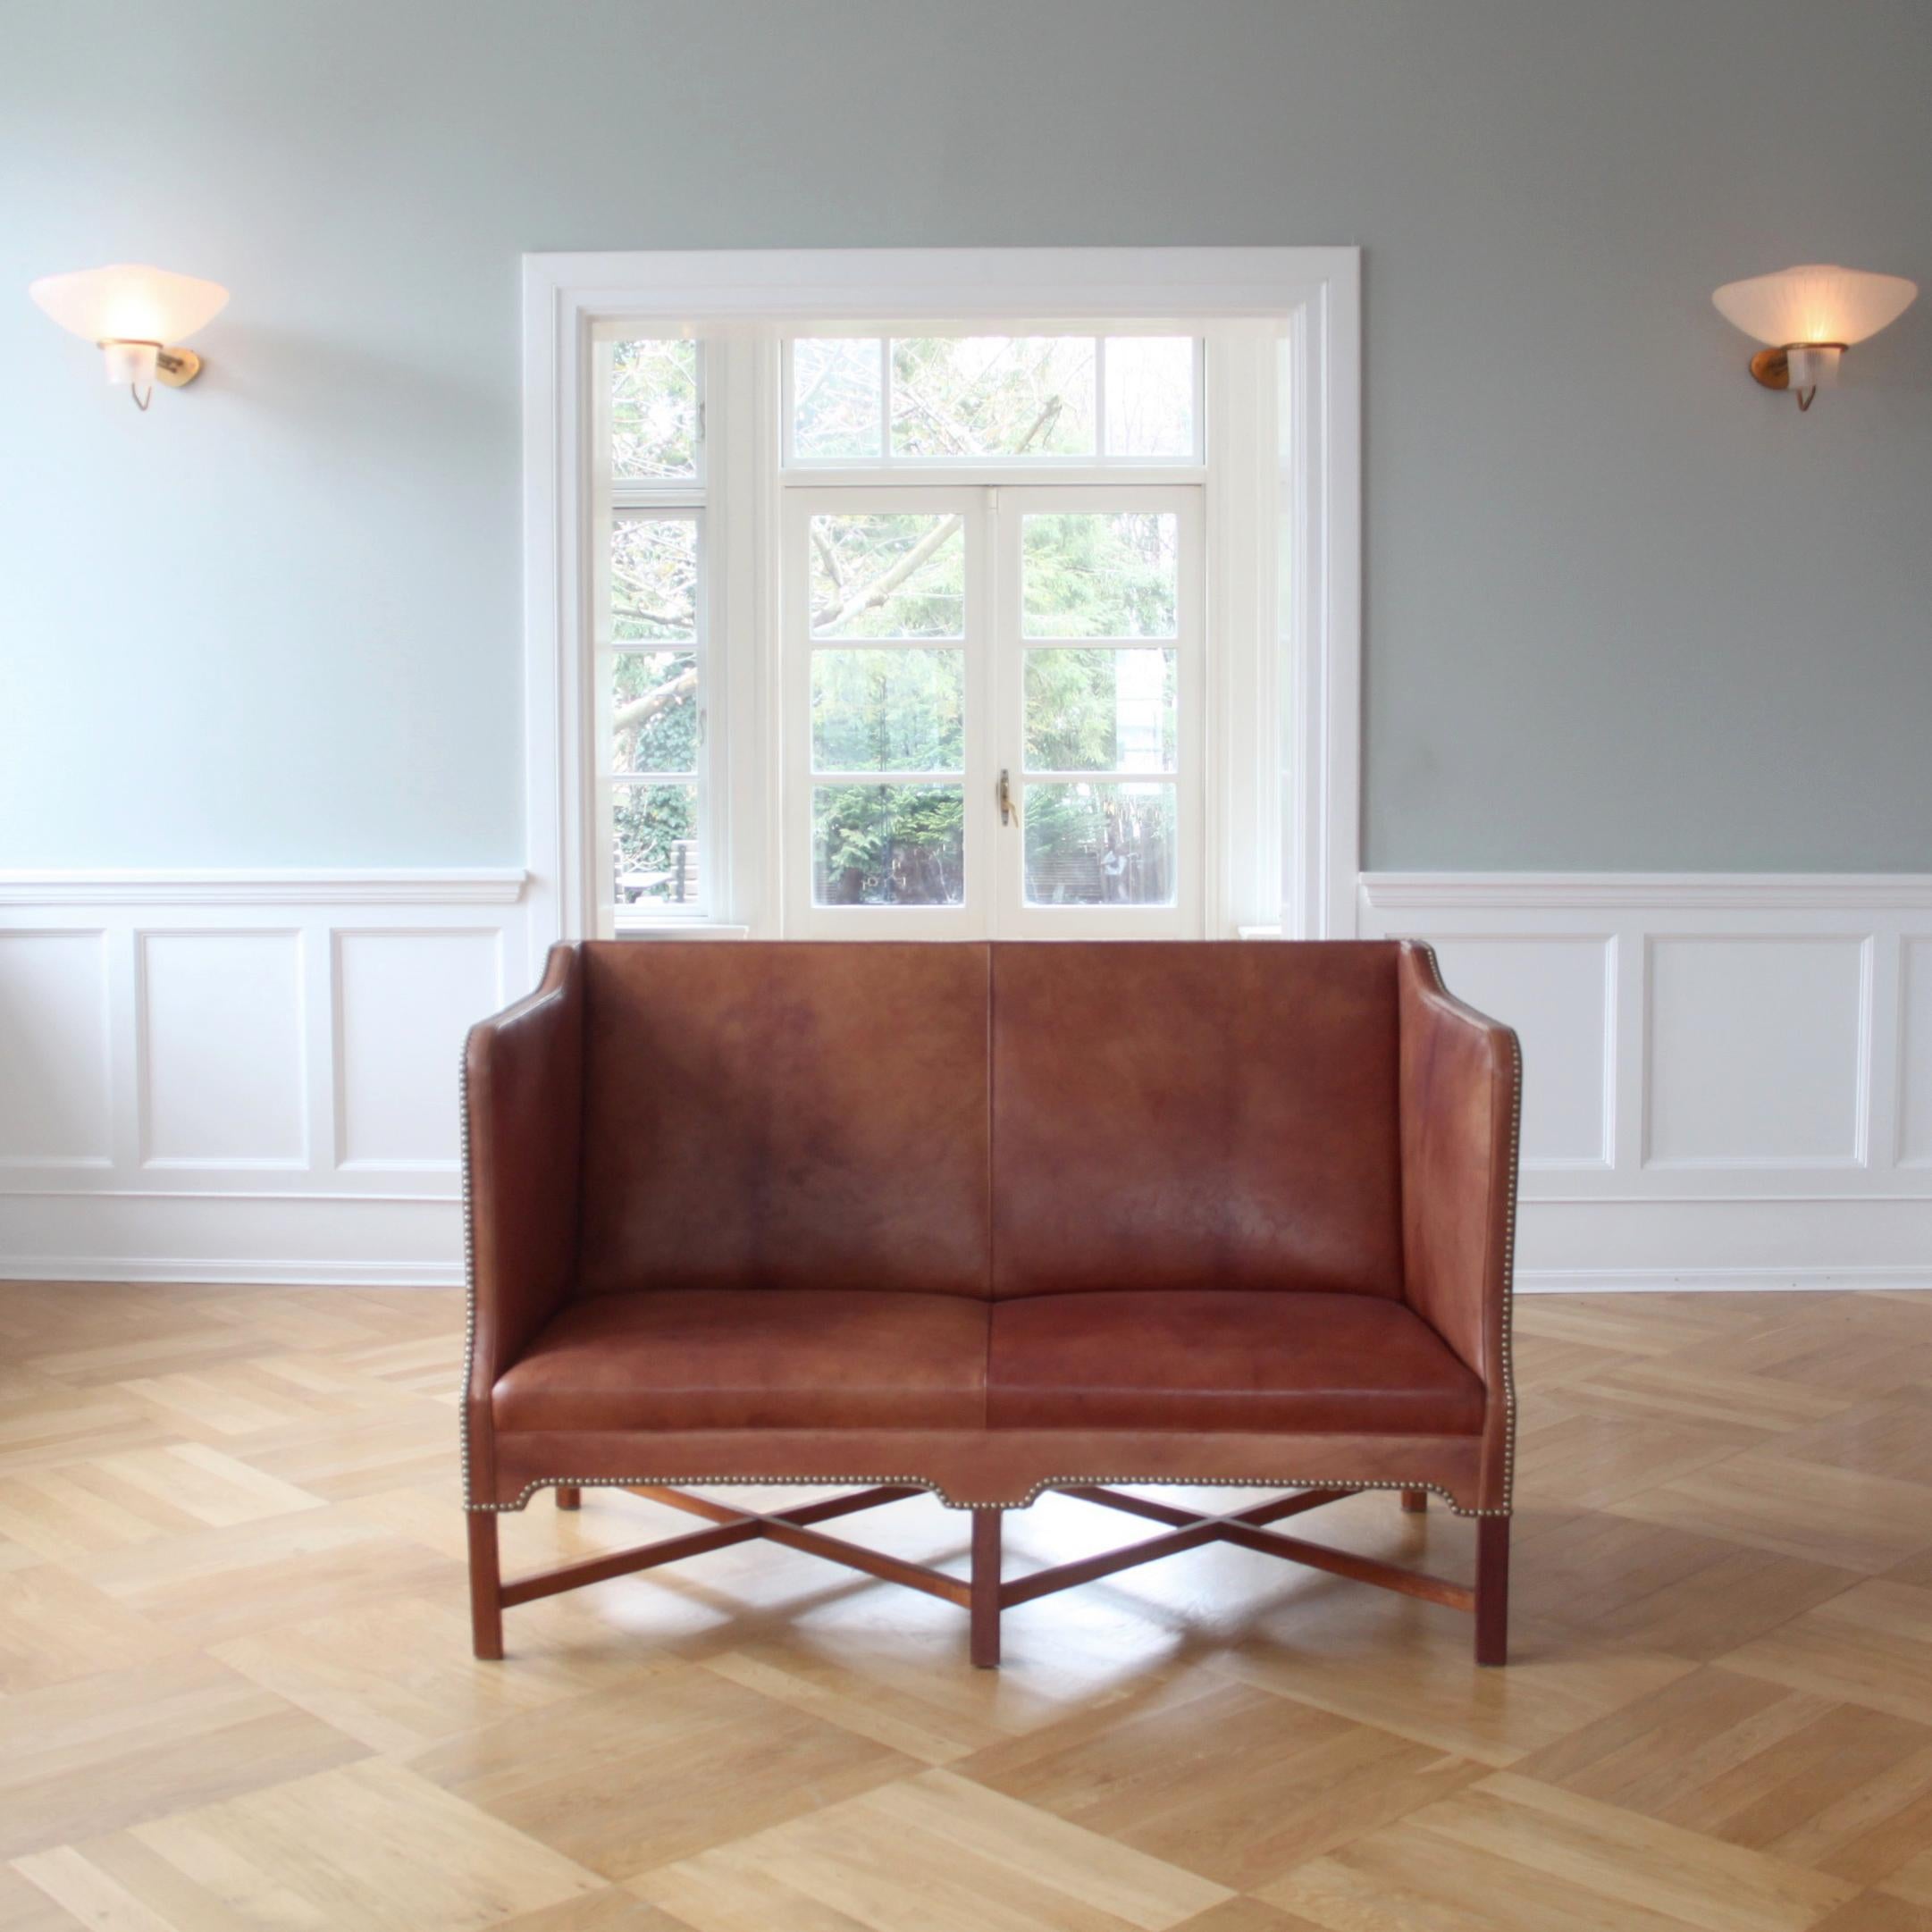 Kaare Klint & Rud Rasmussen snedkerier.

A stunning pair of rare Kaare Klint Model no. 4118S two-seater box-shaped sofas with profiled cross legged mahogany frame. (Also called X-Base Sofas). 
Designed in 1930 for the Ny Carlsberg Foundation,